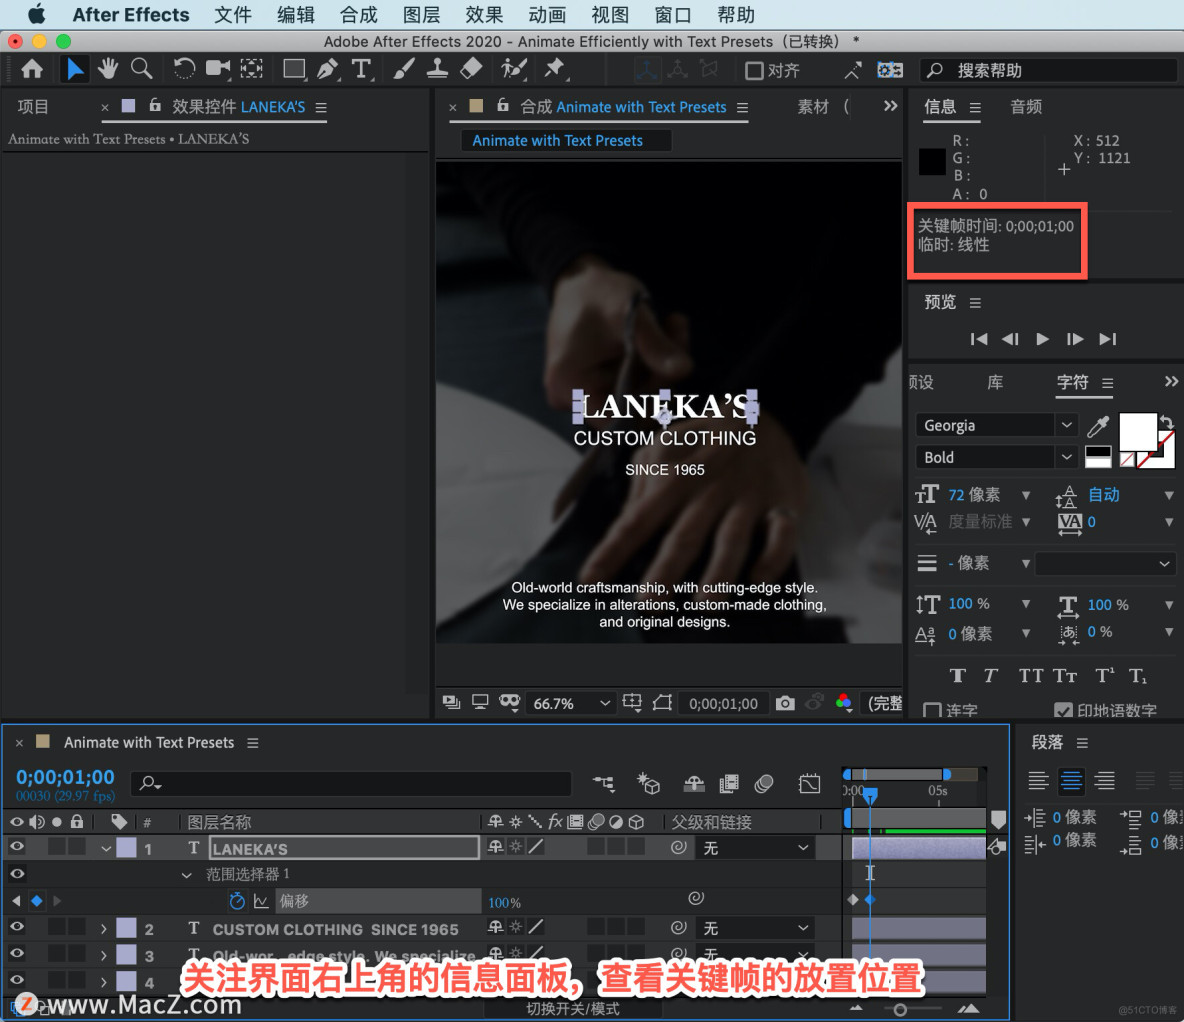 After Effects 教程，如何在 After Effects 中更改动画计时？_AE_03